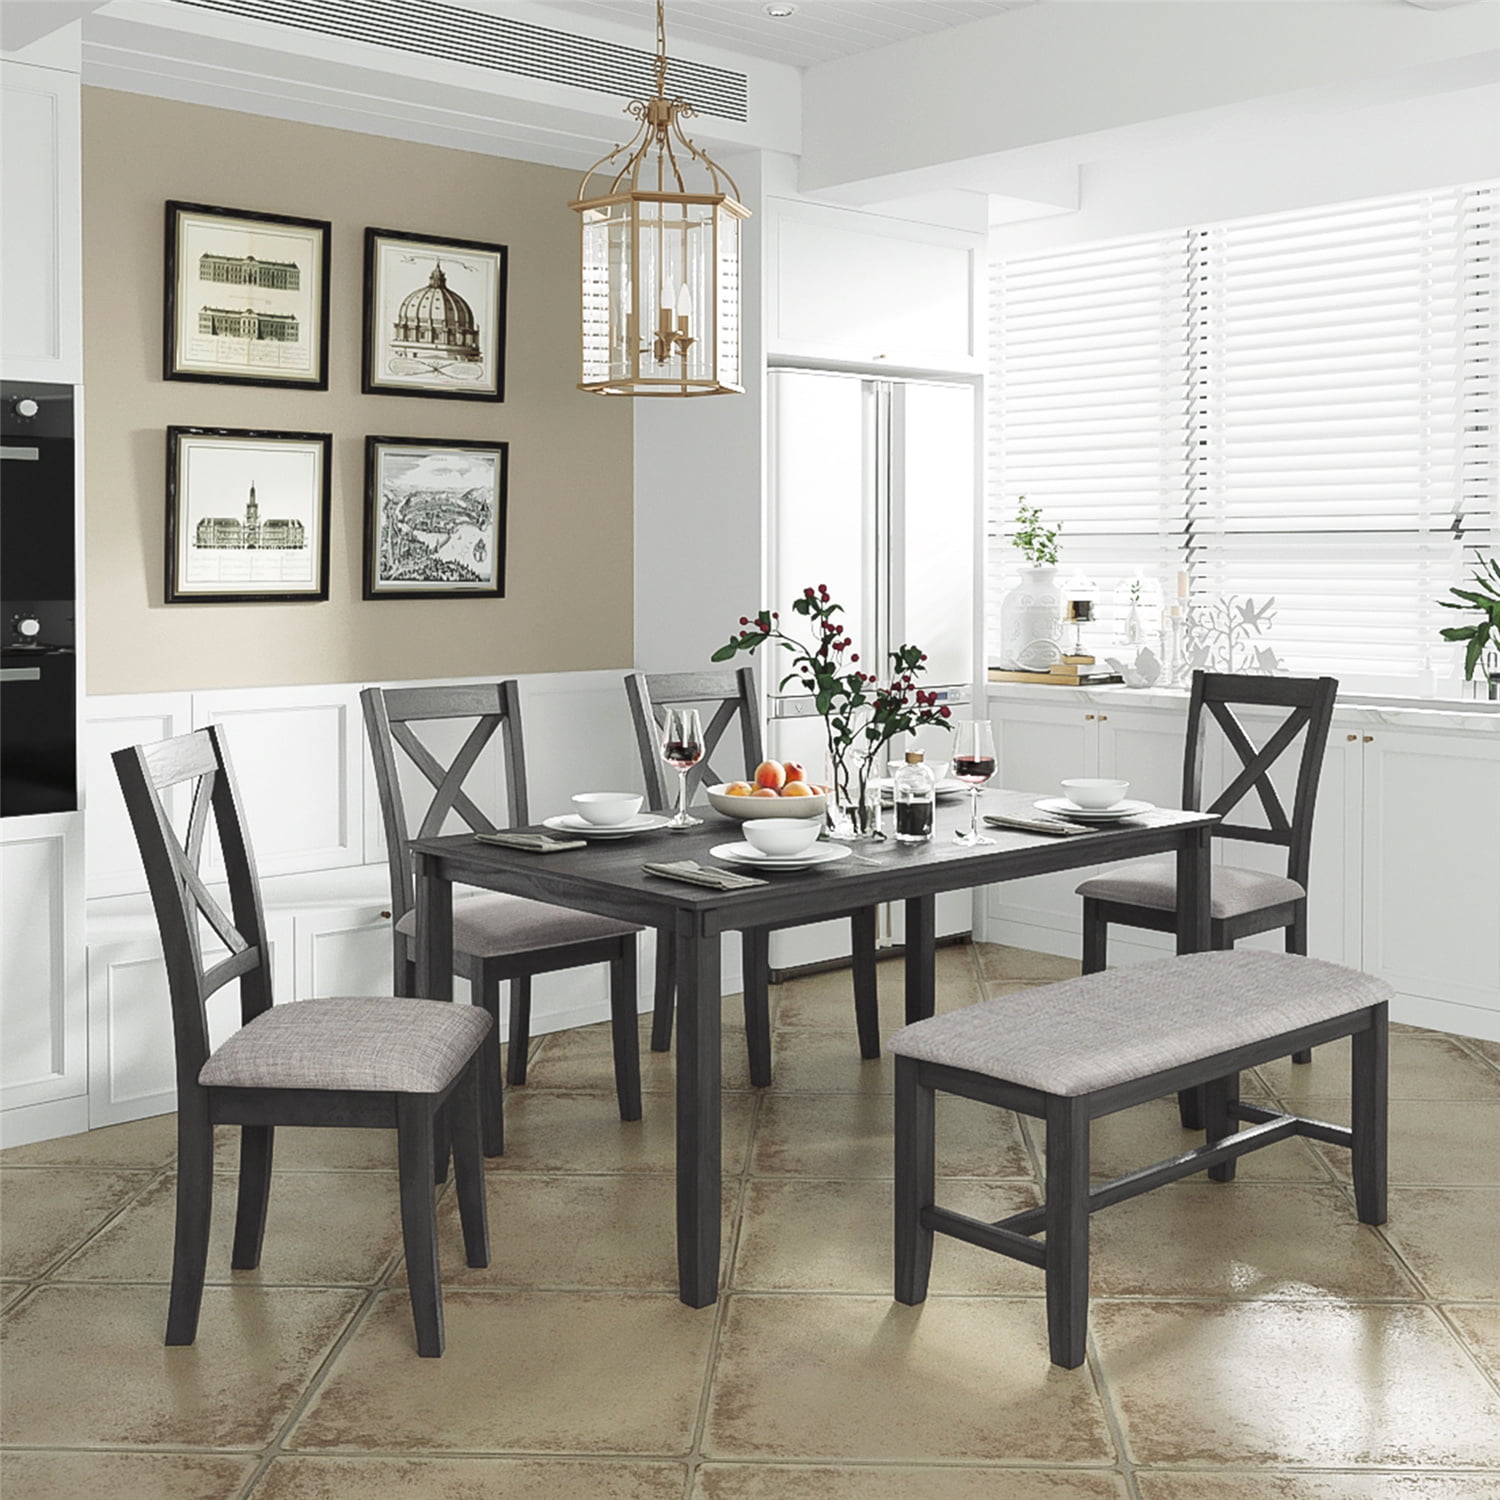 6 Piece Dining Table Set, Wood Dining Room Table and 4 Chairs with ...